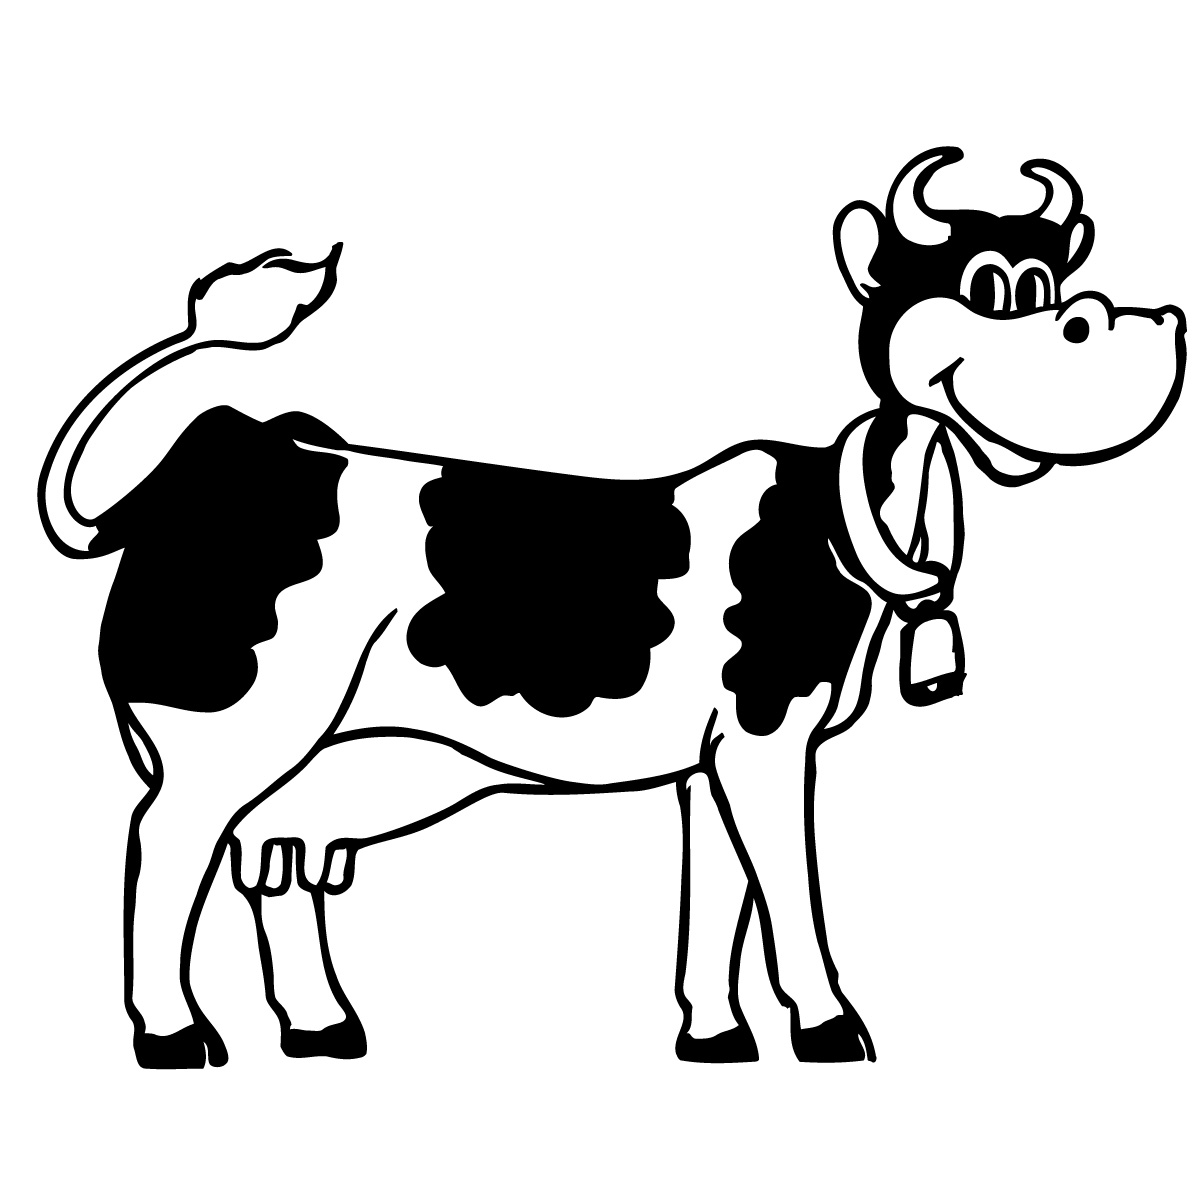 Cow face clipart free clipart images